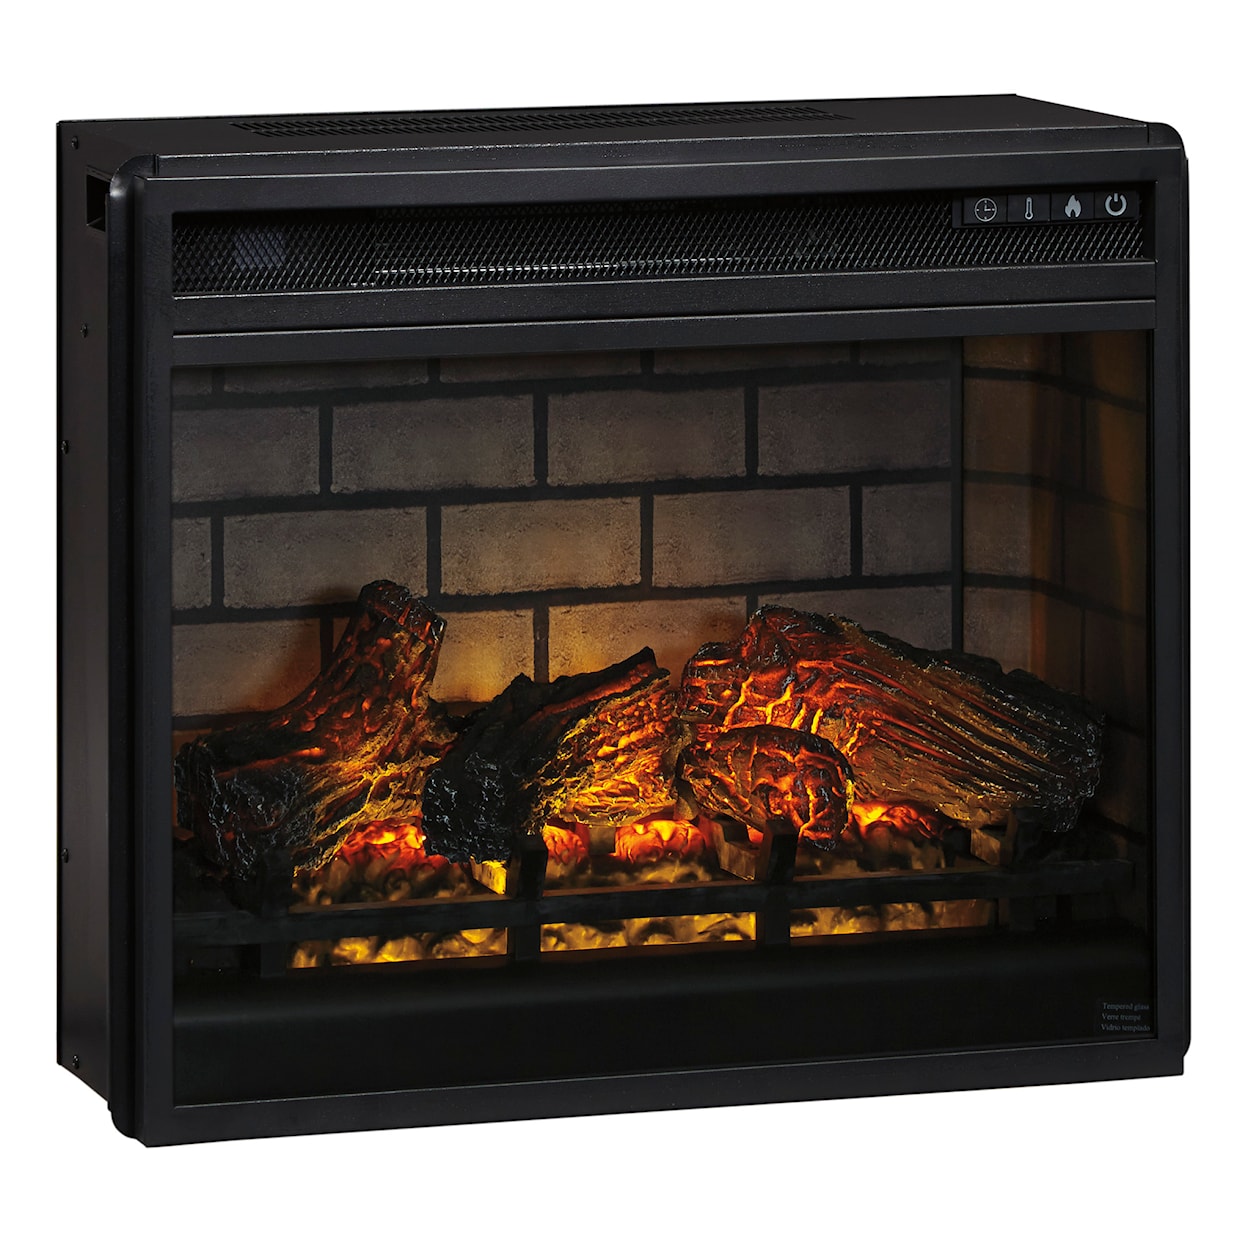 Signature Design by Ashley Entertainment Accessories Electric Infrared Fireplace Insert